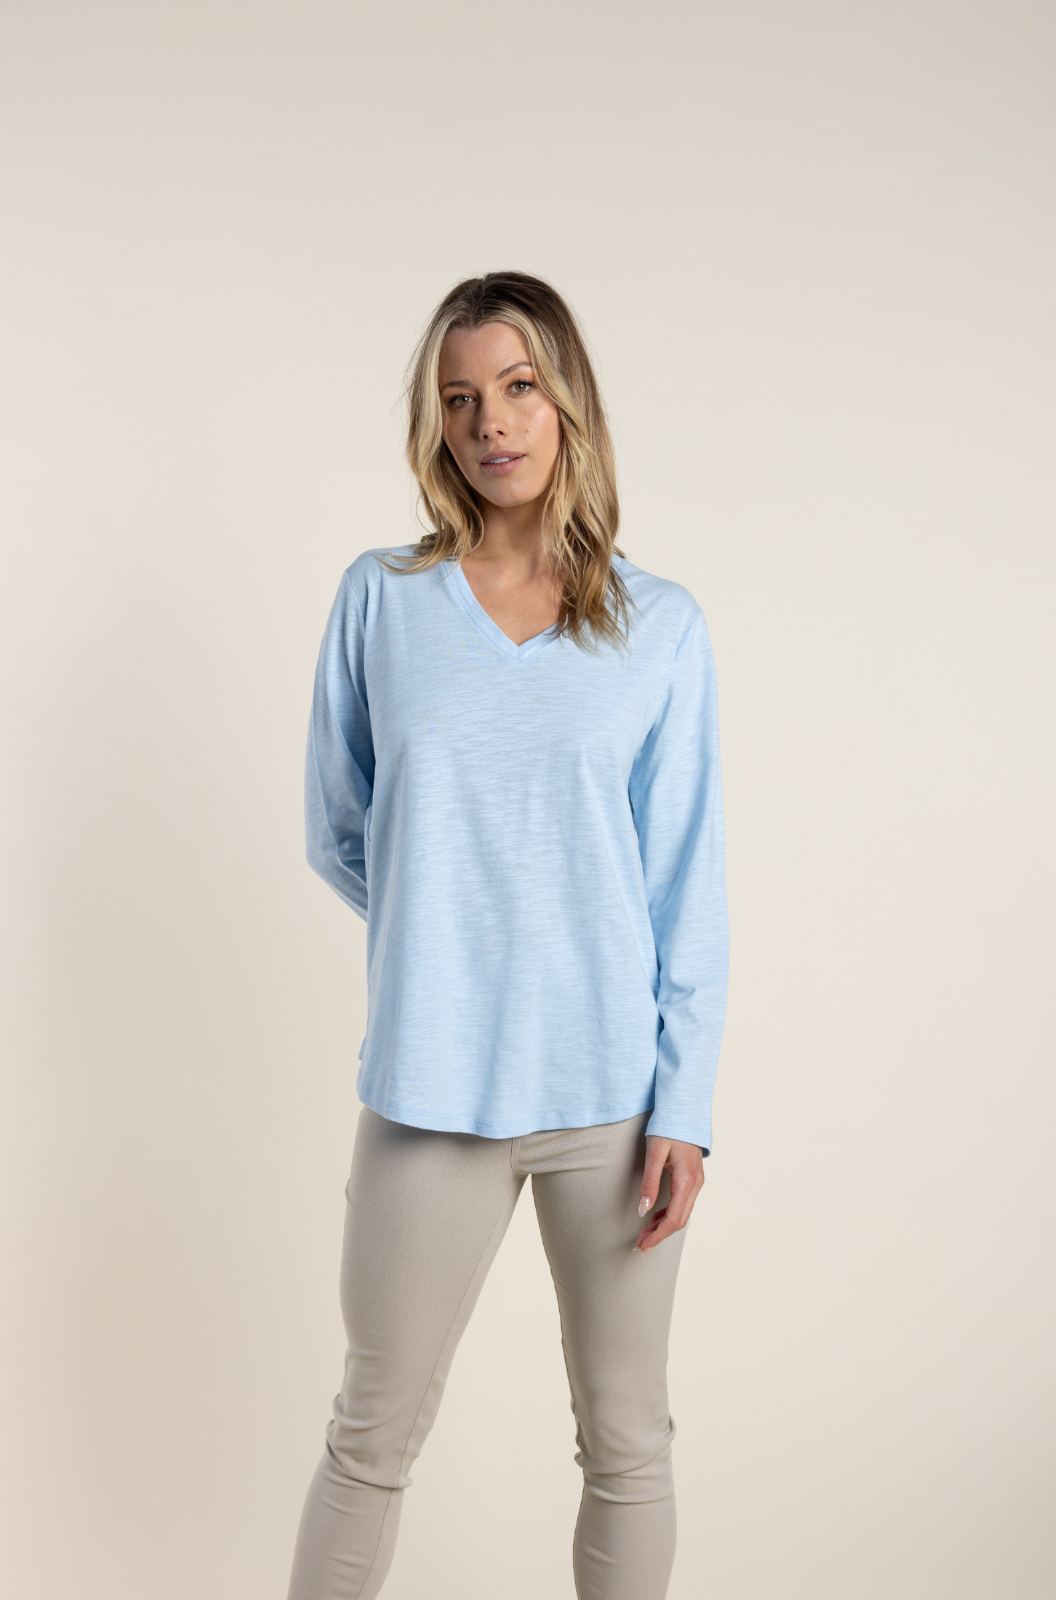 Two-T's Long Sleeve V Neck Tee in Ice Blue